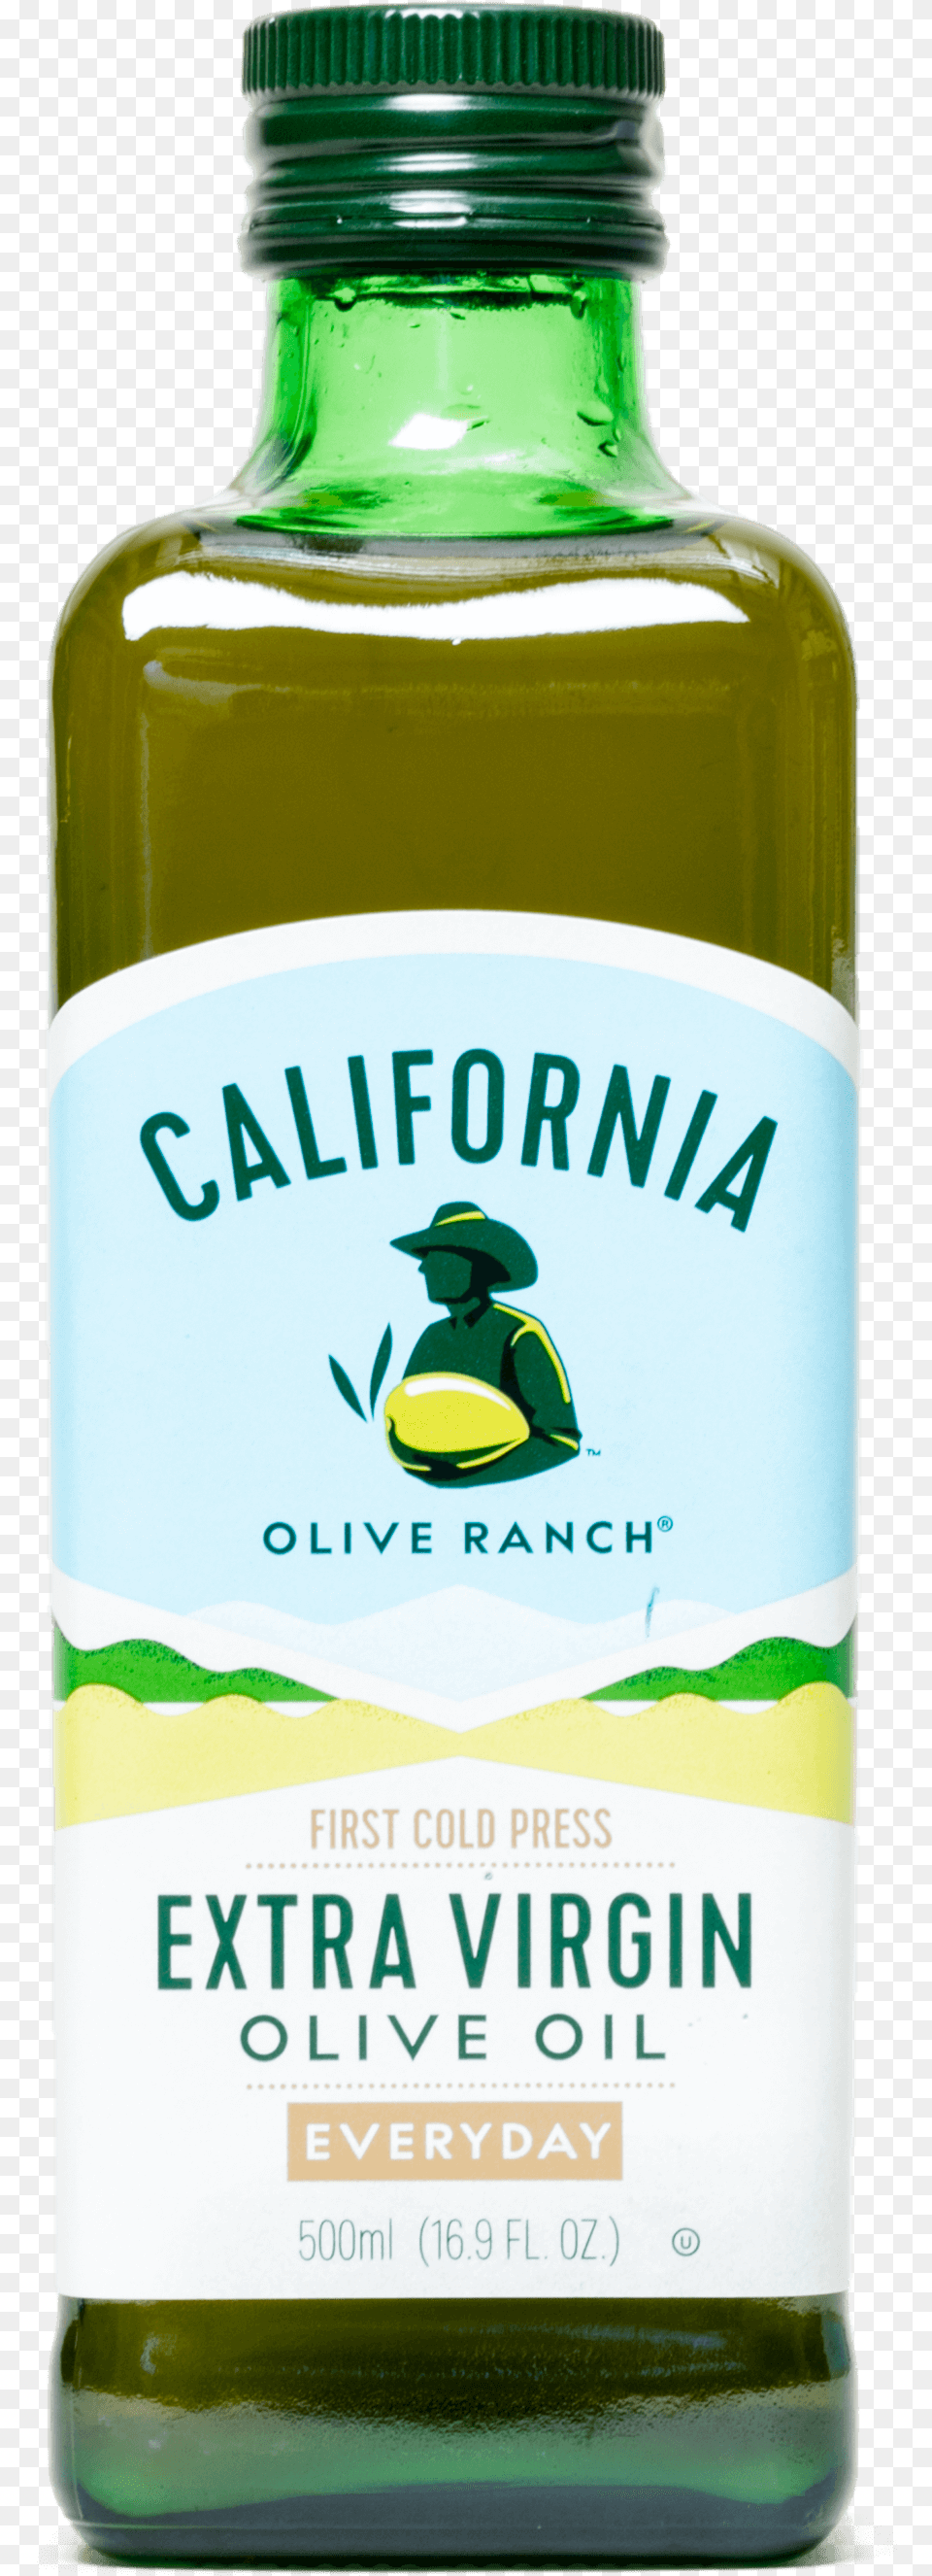 California Olive Ranch Extra Virgin Olive Oil, Bottle, Aftershave, Man, Male Png